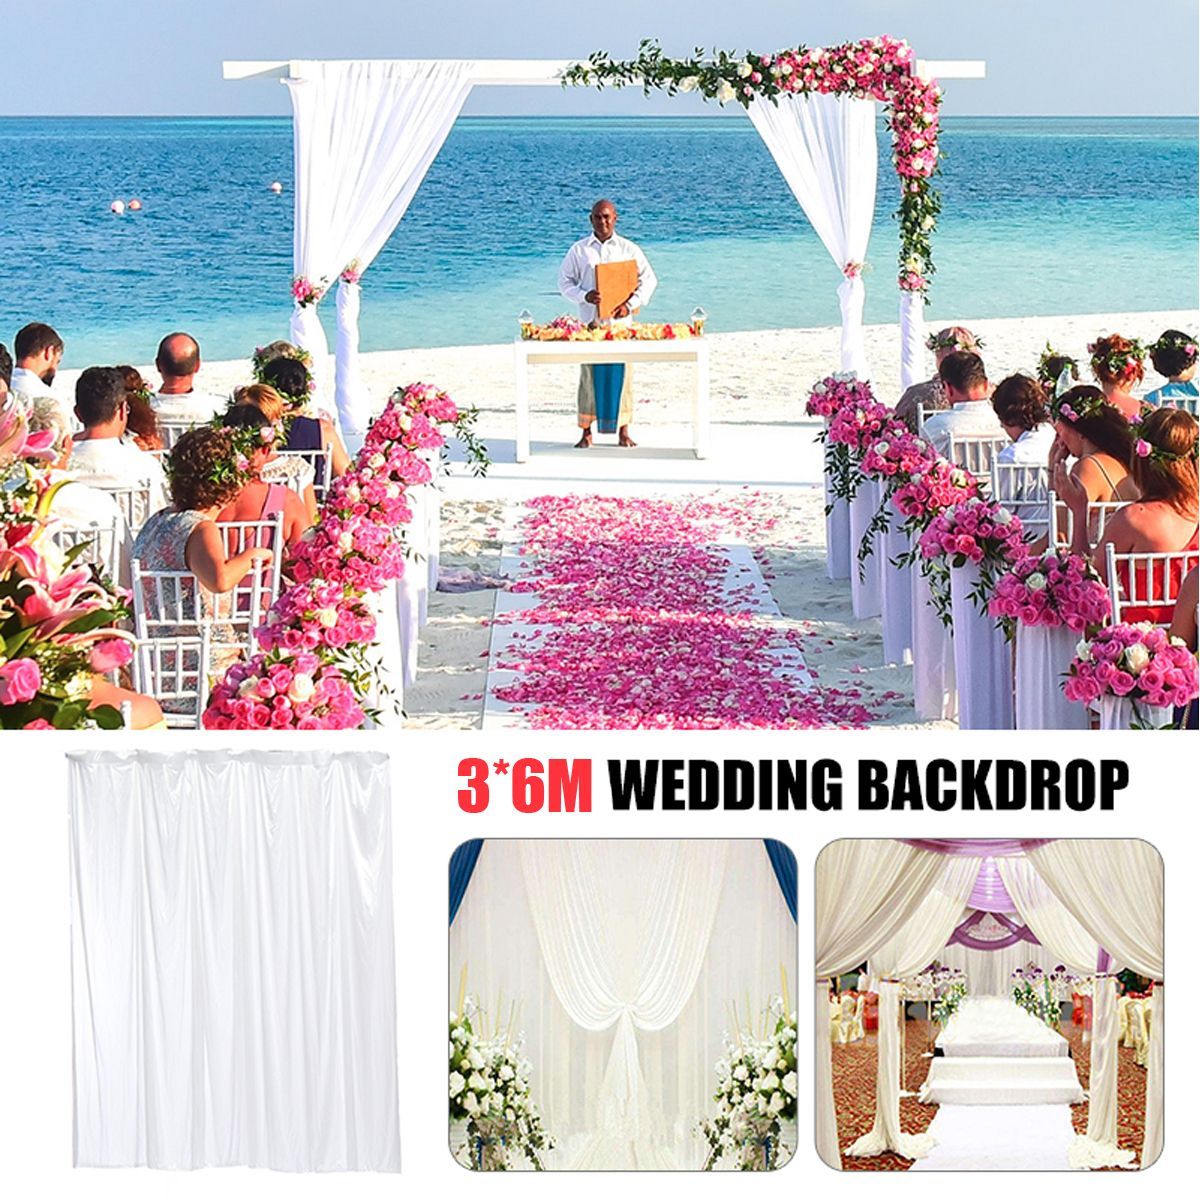 36M-White-Wedding-Party-Backdrop-Curtain-Drapes-Background-Decorations-Studio-Draping-1452746